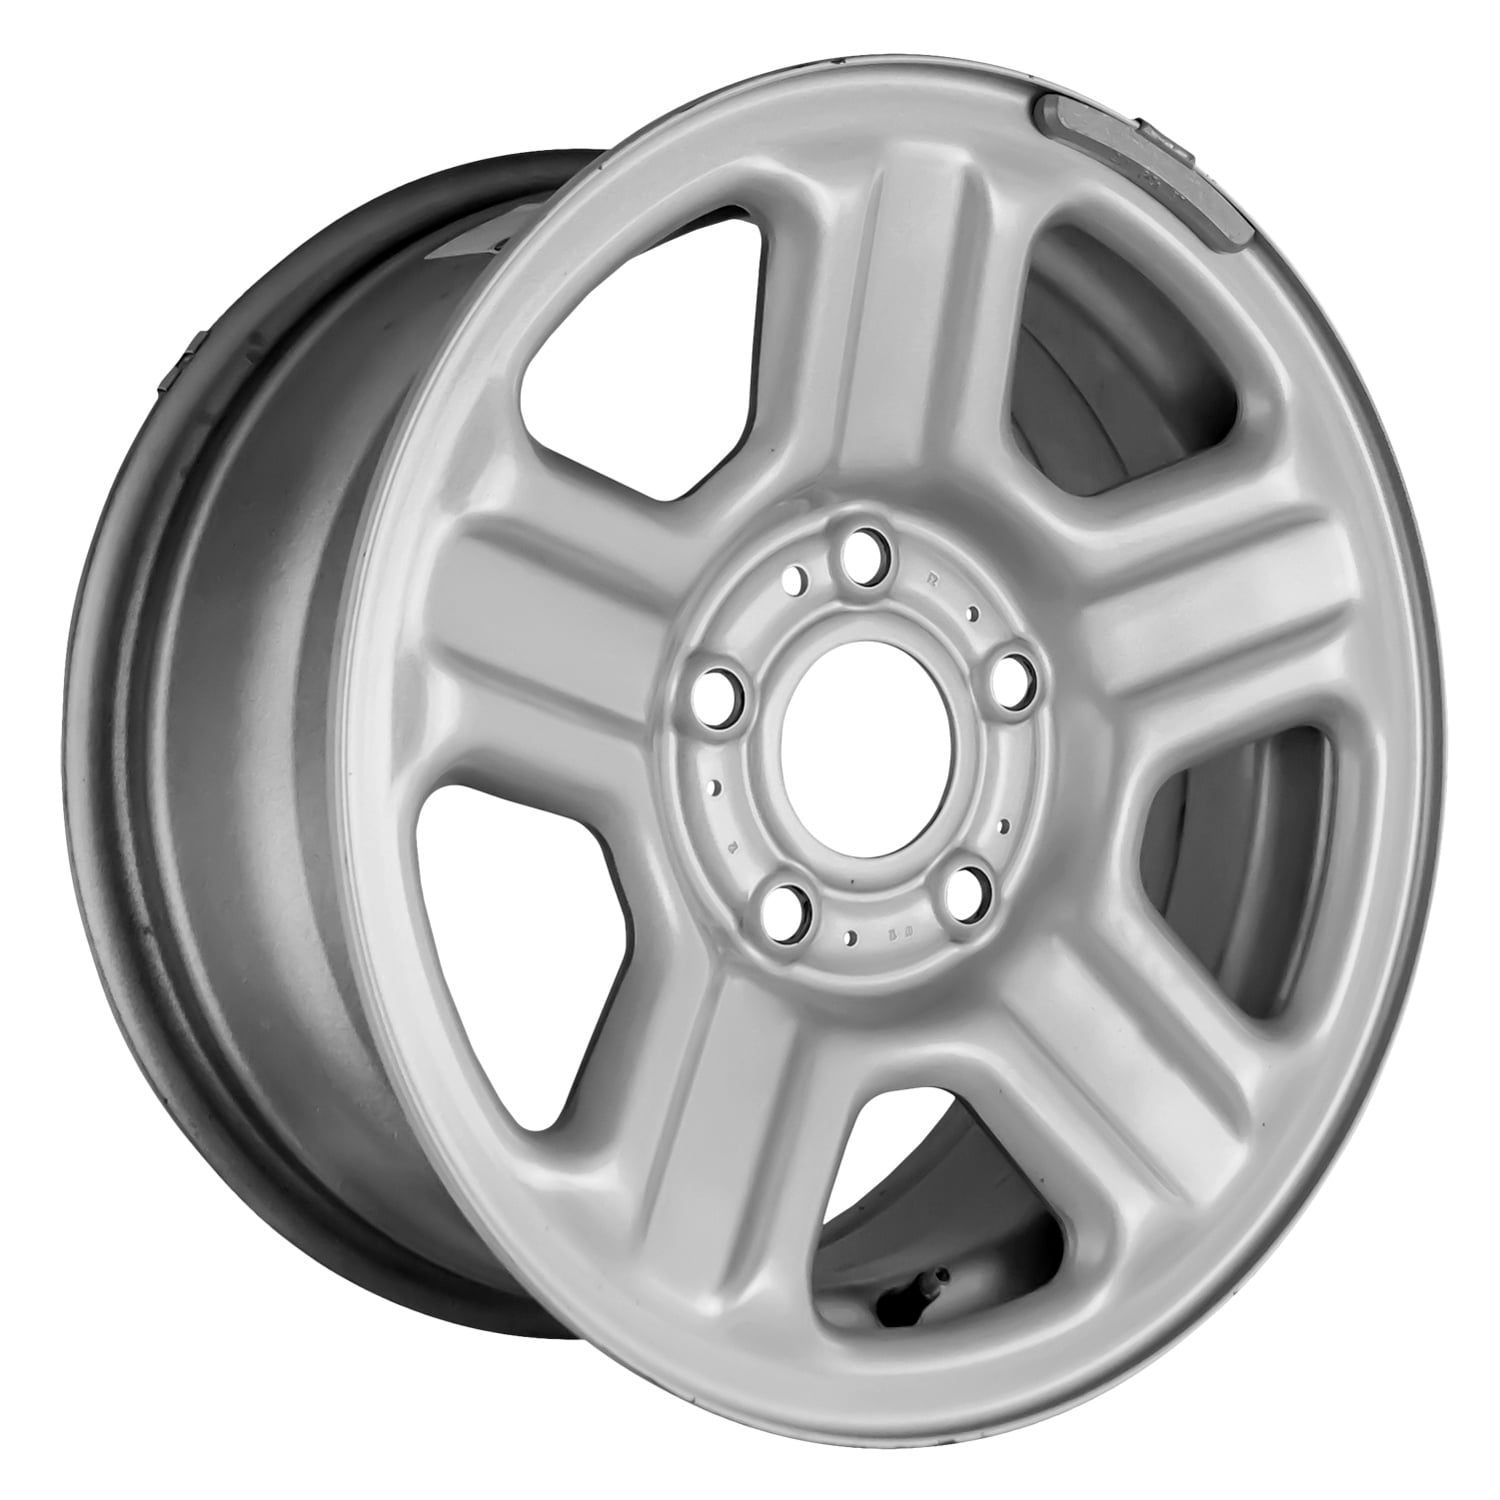 16 X 7 Reconditioned OEM Steel Wheel, Silver, Fits 2007-2017 Jeep Wrangler  